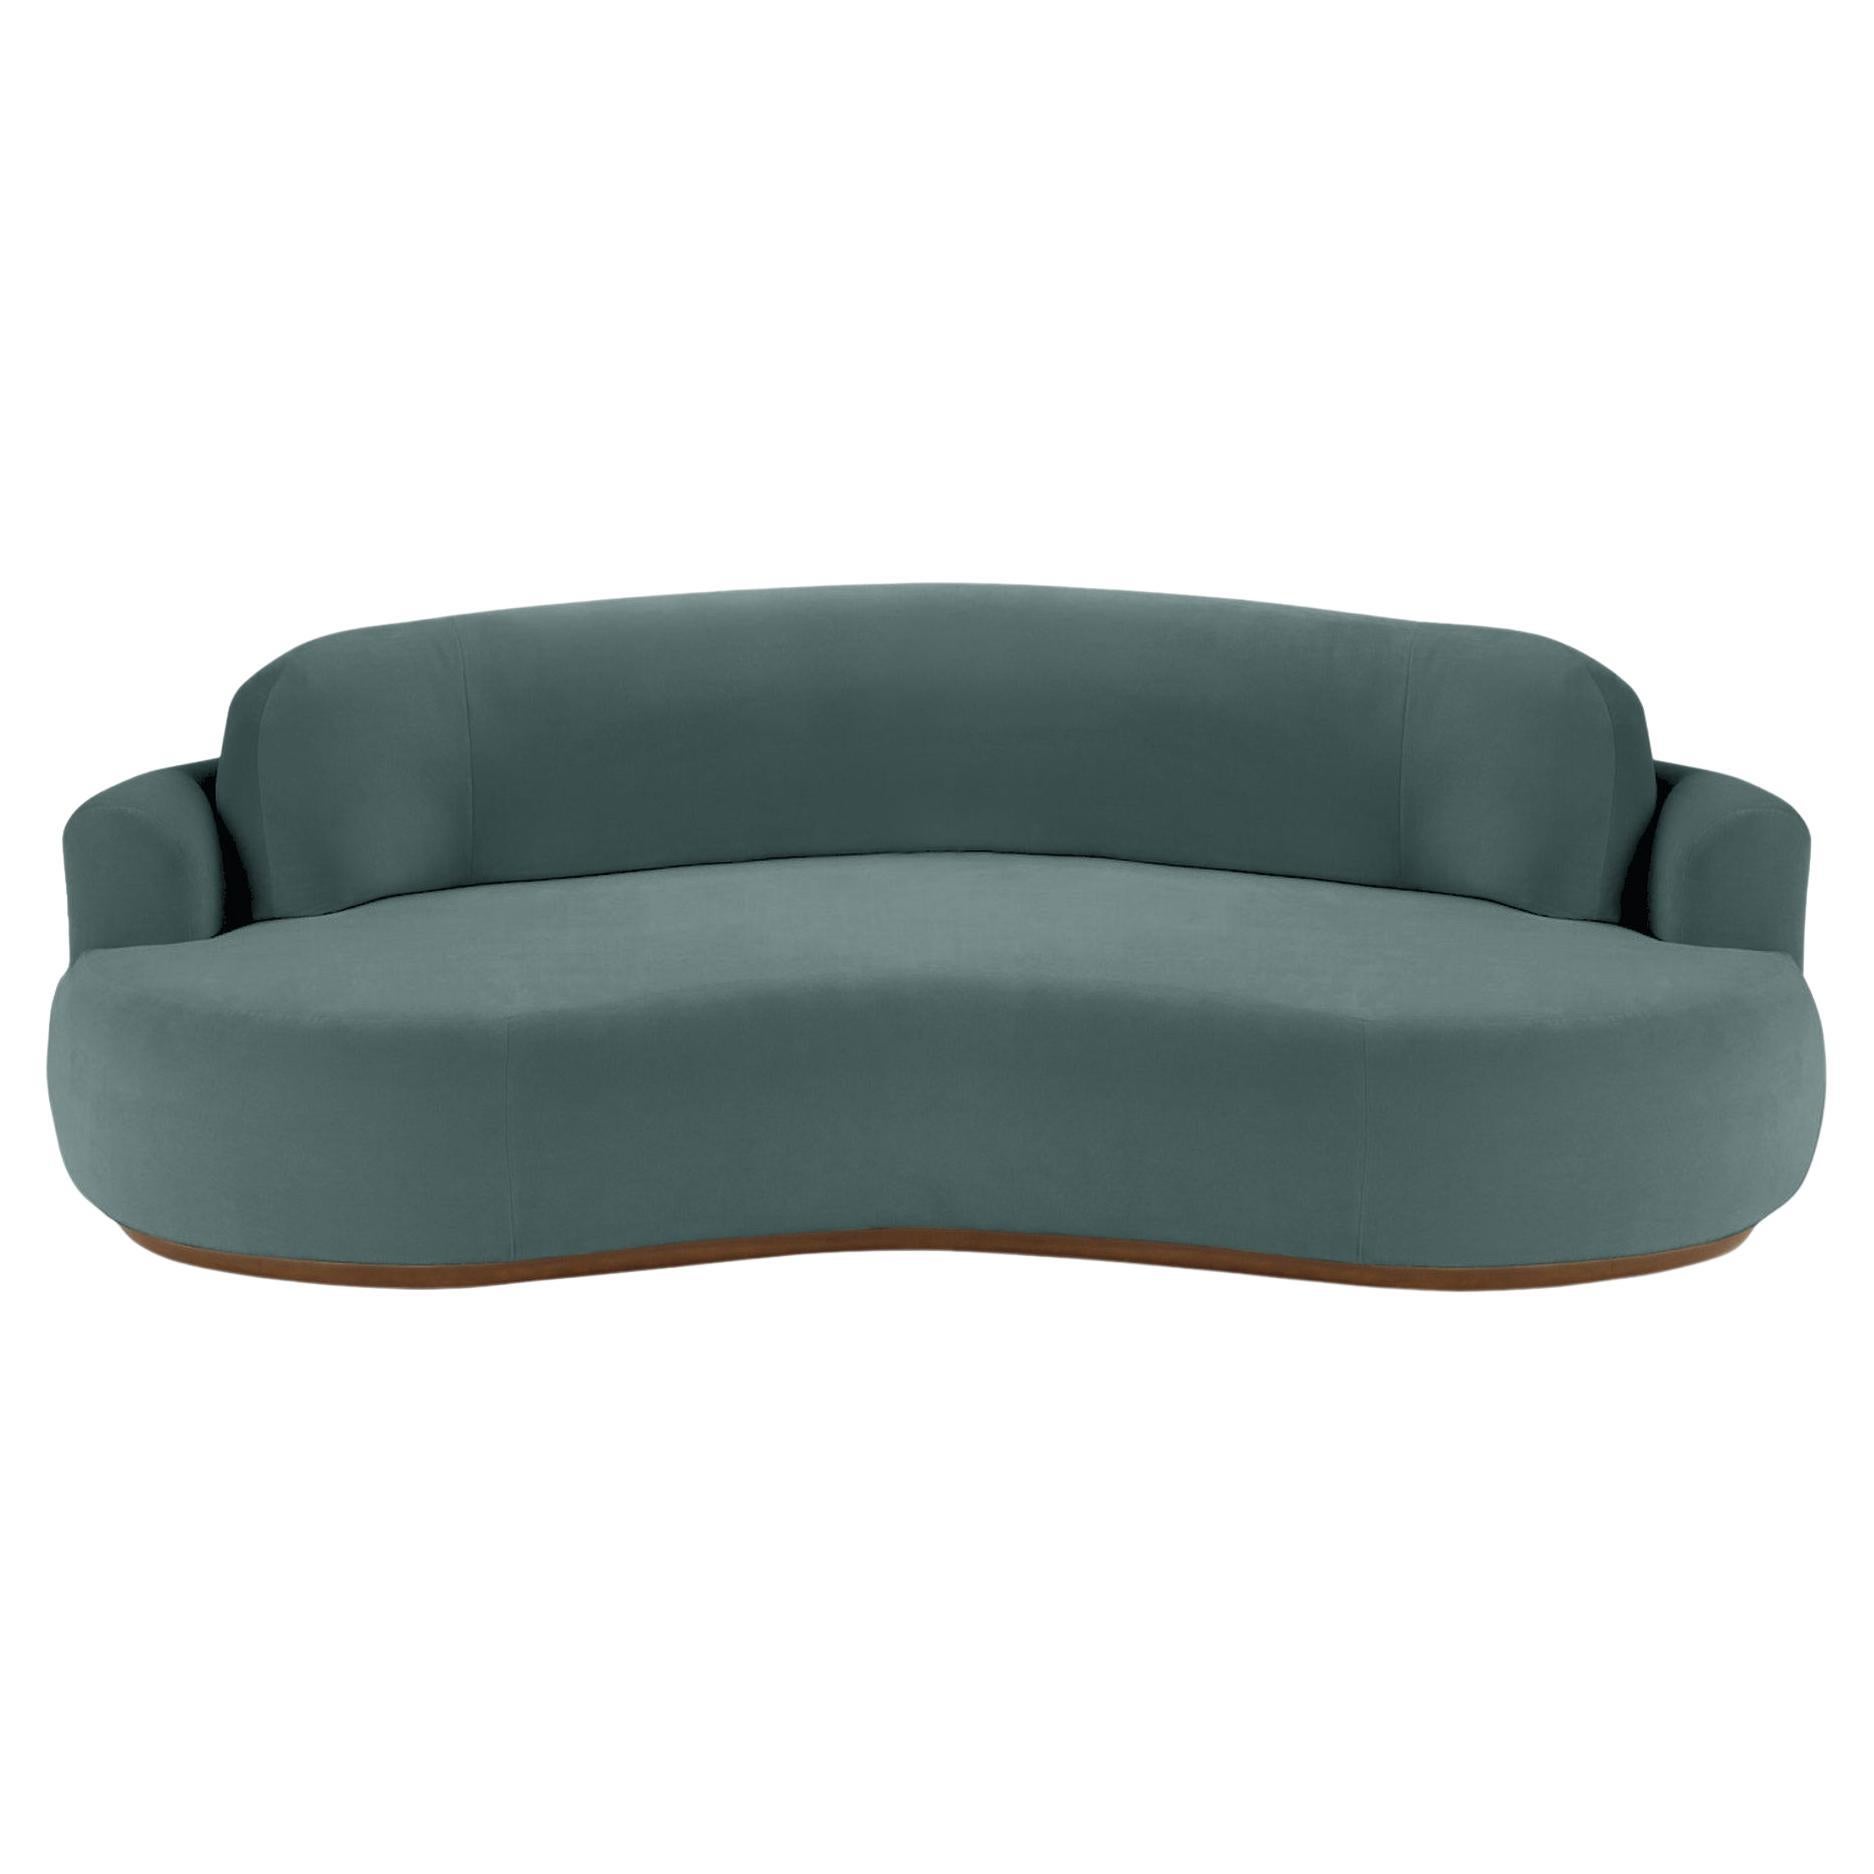 Naked Curved Sofa, Medium with Beech Ash-056-1 and Teal For Sale